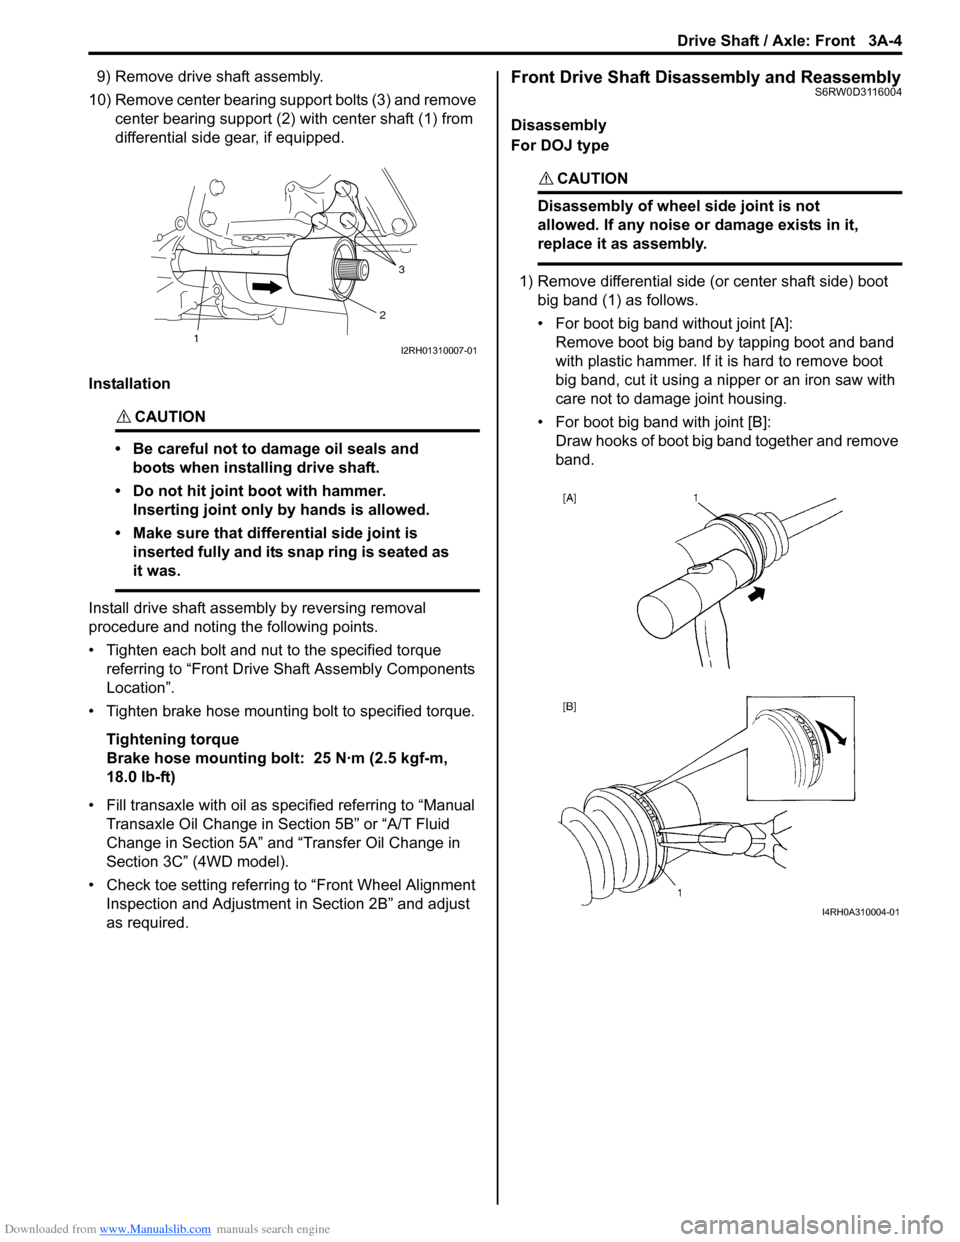 SUZUKI SX4 2006 1.G Service Workshop Manual Downloaded from www.Manualslib.com manuals search engine Drive Shaft / Axle: Front 3A-4
9) Remove drive shaft assembly.
10) Remove center bearing support bolts (3) and remove 
center bearing support (